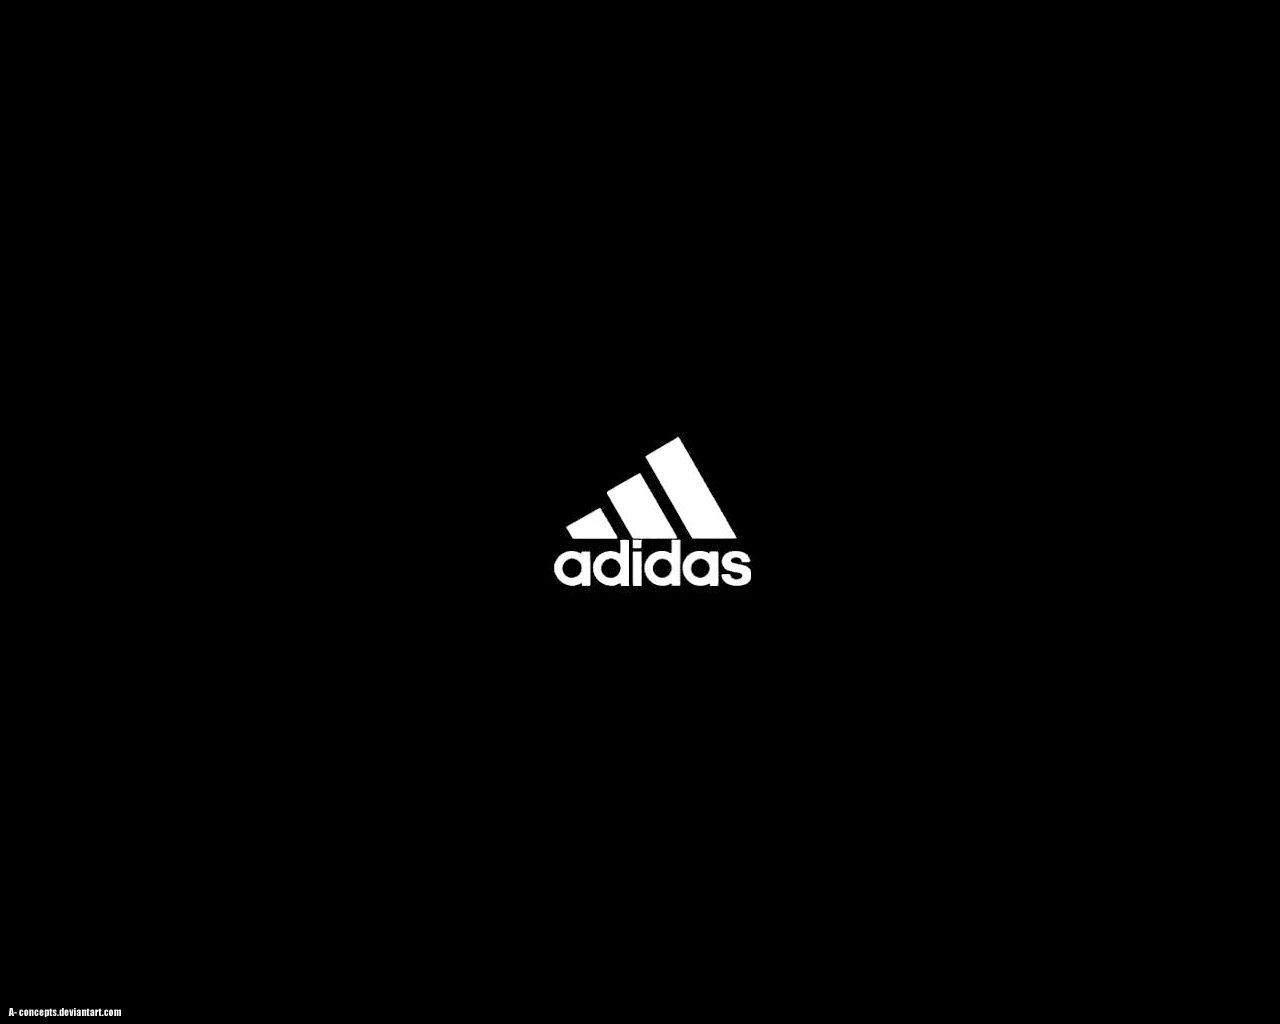 adidas with black background